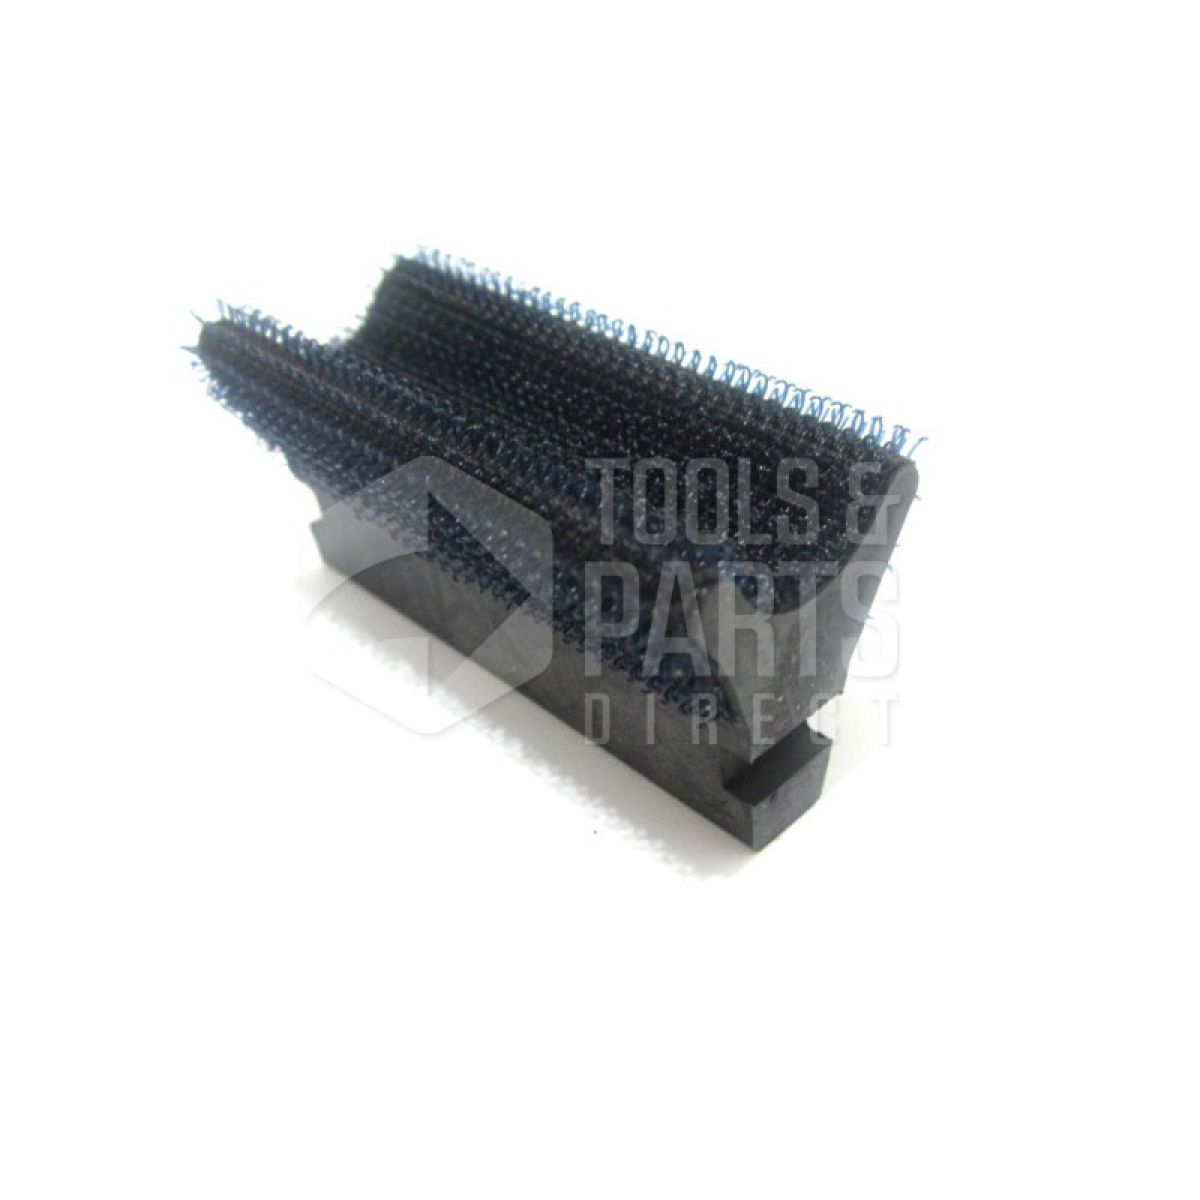 https://toolsandpartsdirect.co.uk/image-factory/739df36146a17d0c46a138ddc17f23bffa664036~1200x1200/images/products/CO6OLD9CoOGqnFstHJyigGNniR0UnI4dfobPE72Y.jpg